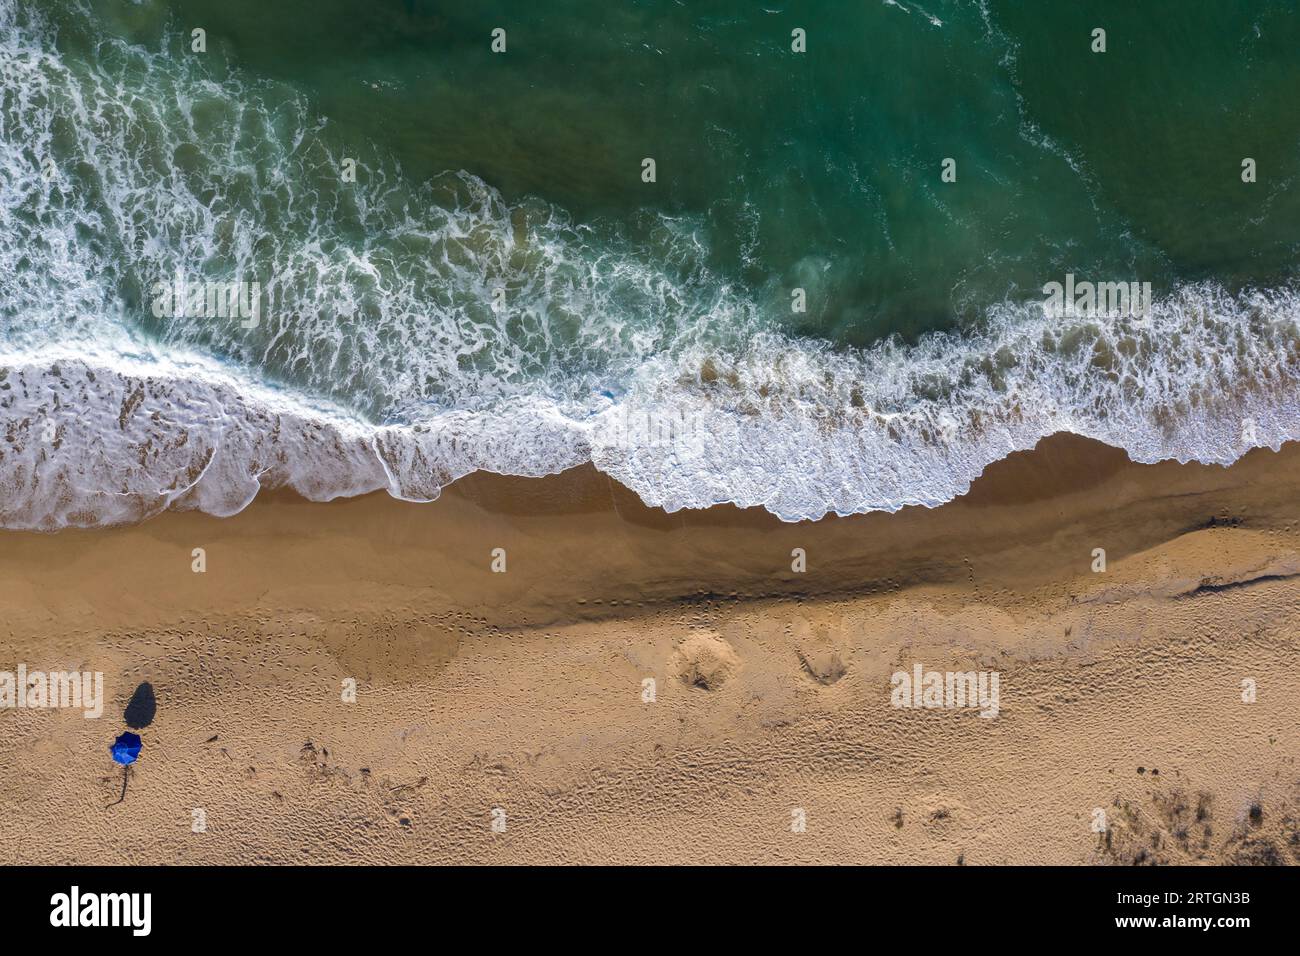 Aerial view of secluded beach with a single beach umbrella Stock Photo